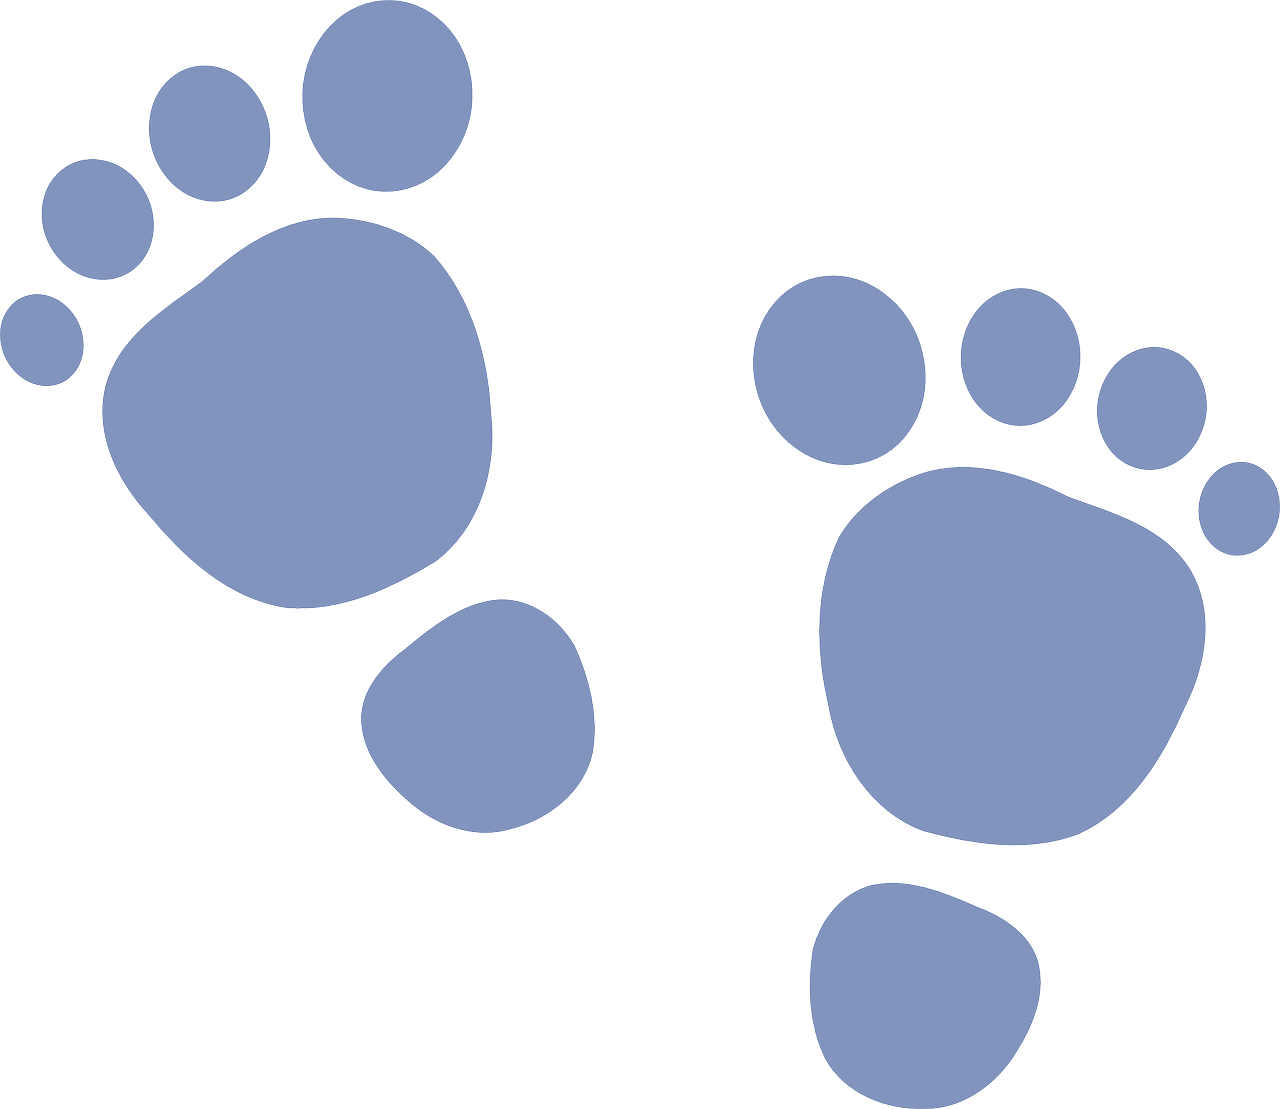 a pair of blue footprints on a black background, cartoonish, bears, zoomed out very far, graphic